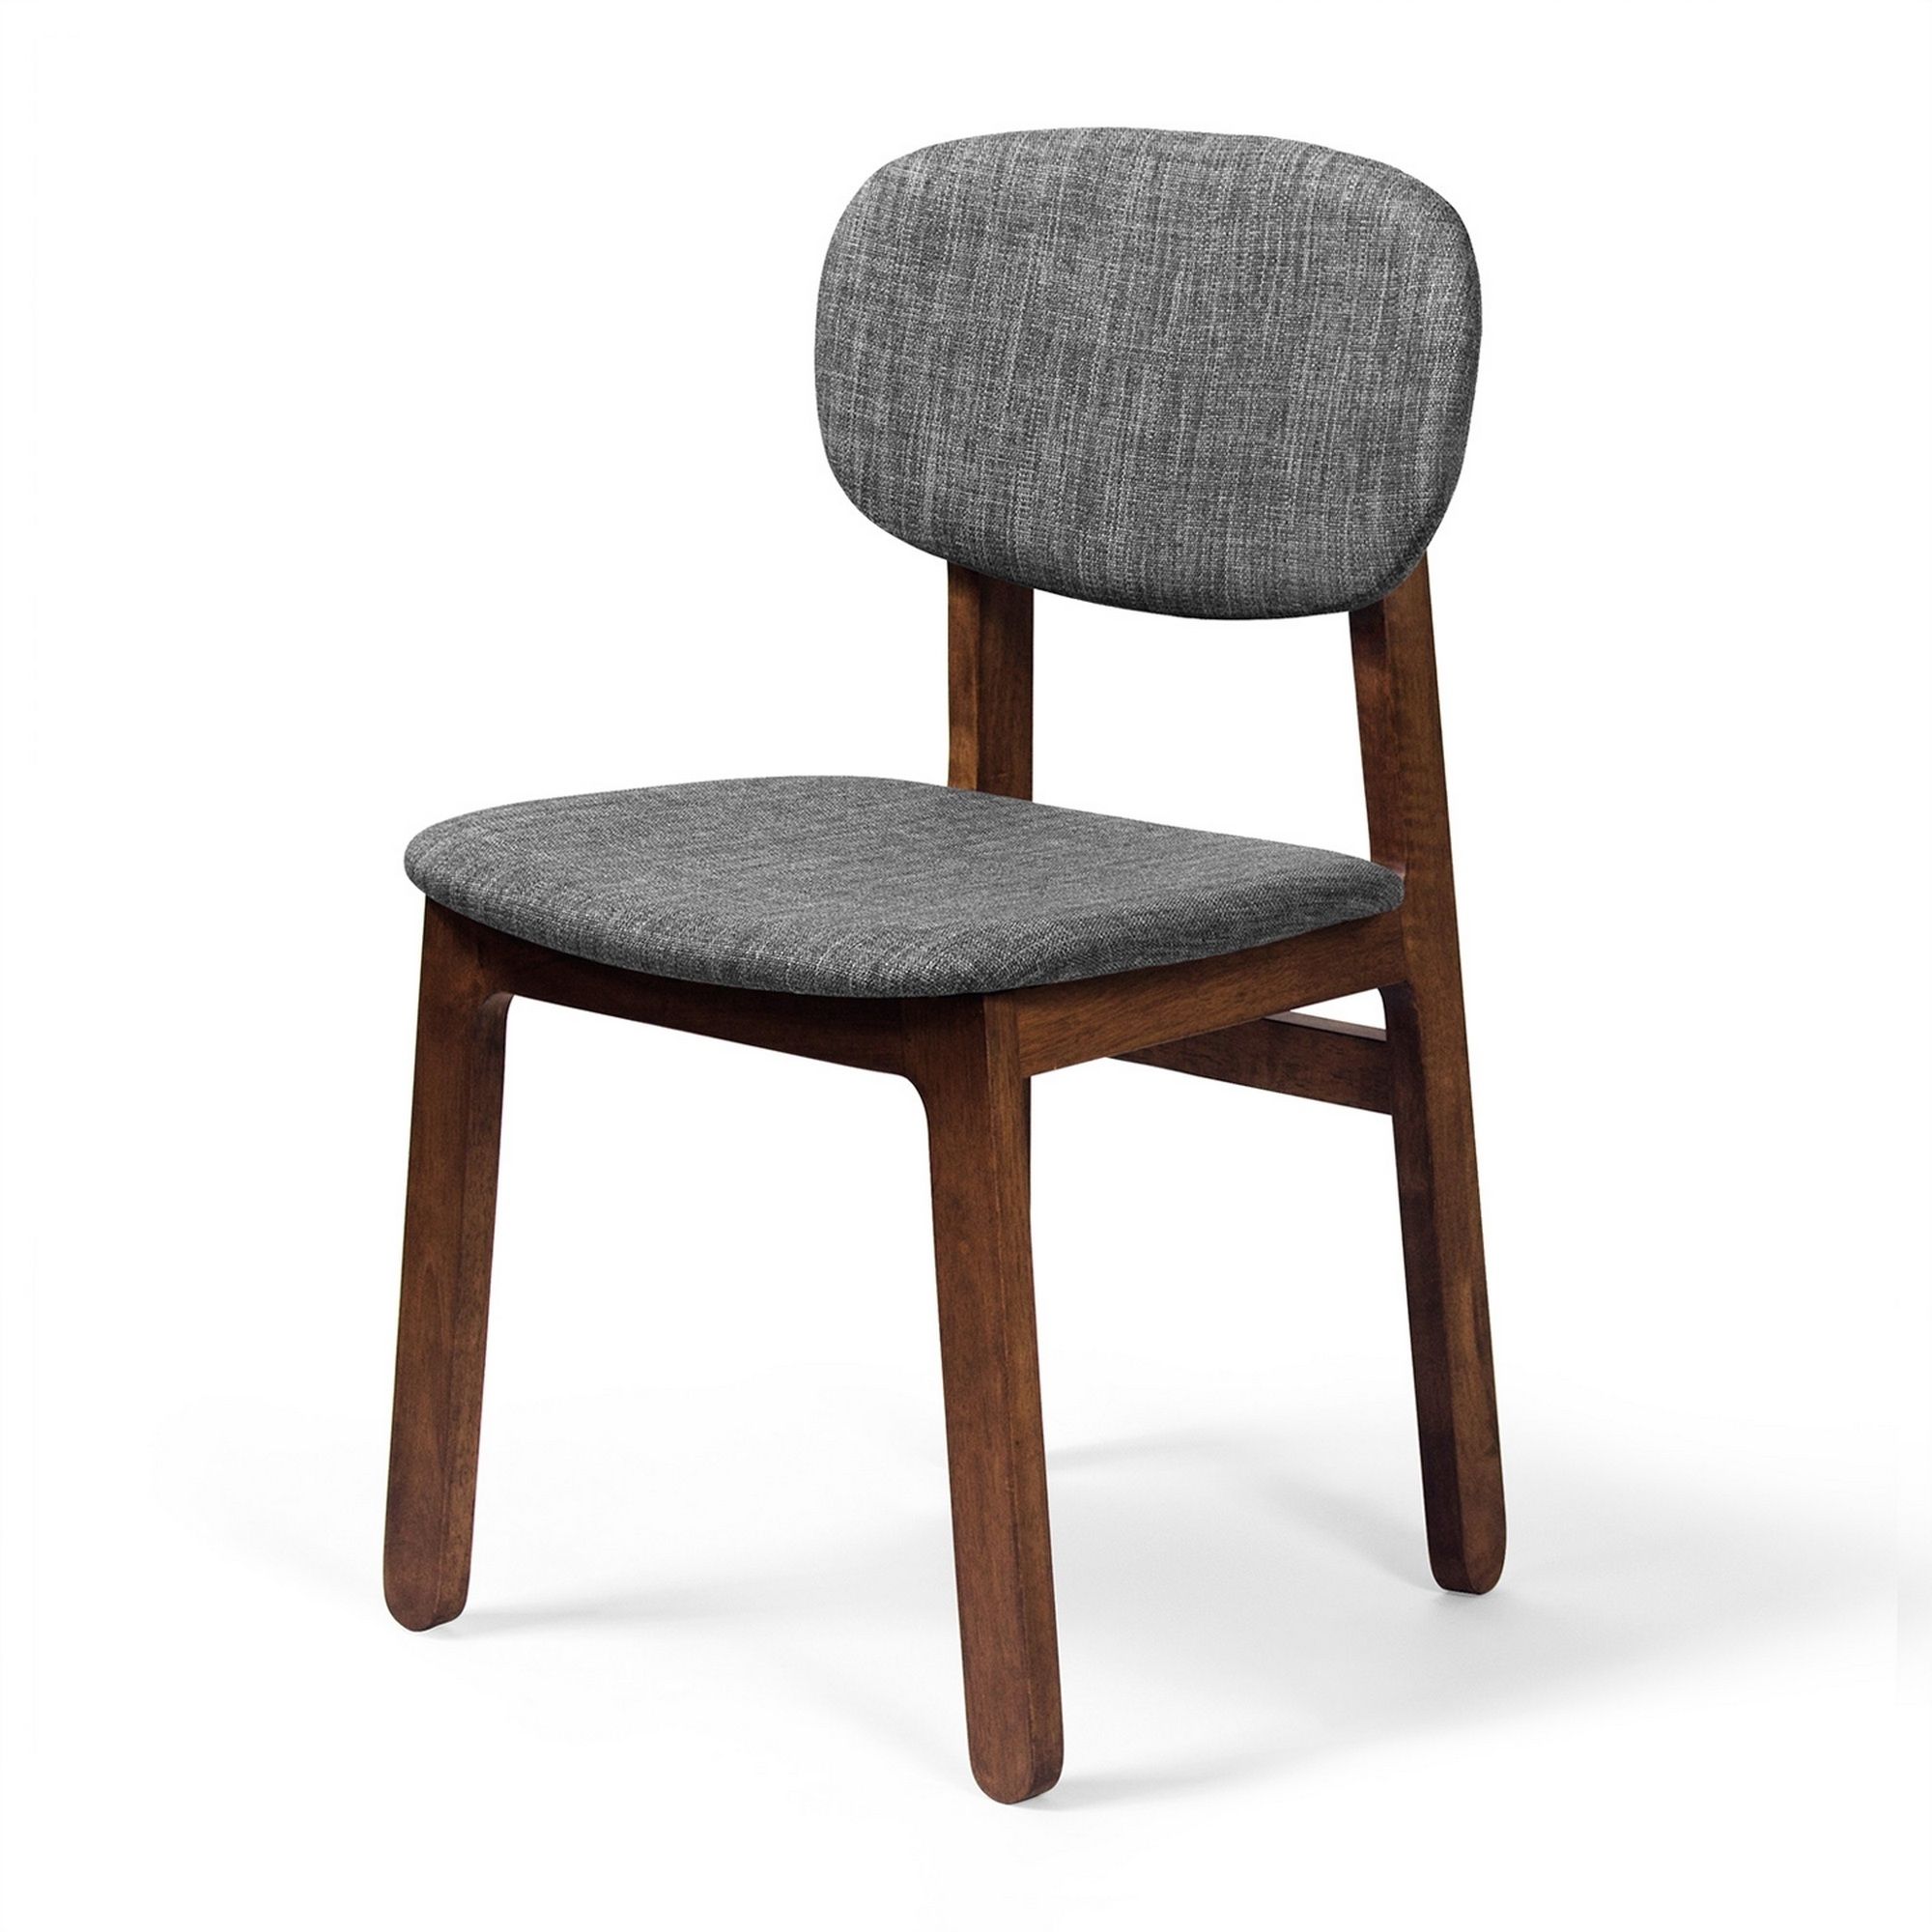 2021 Popular Jaxon Grey Upholstered Side Chairs